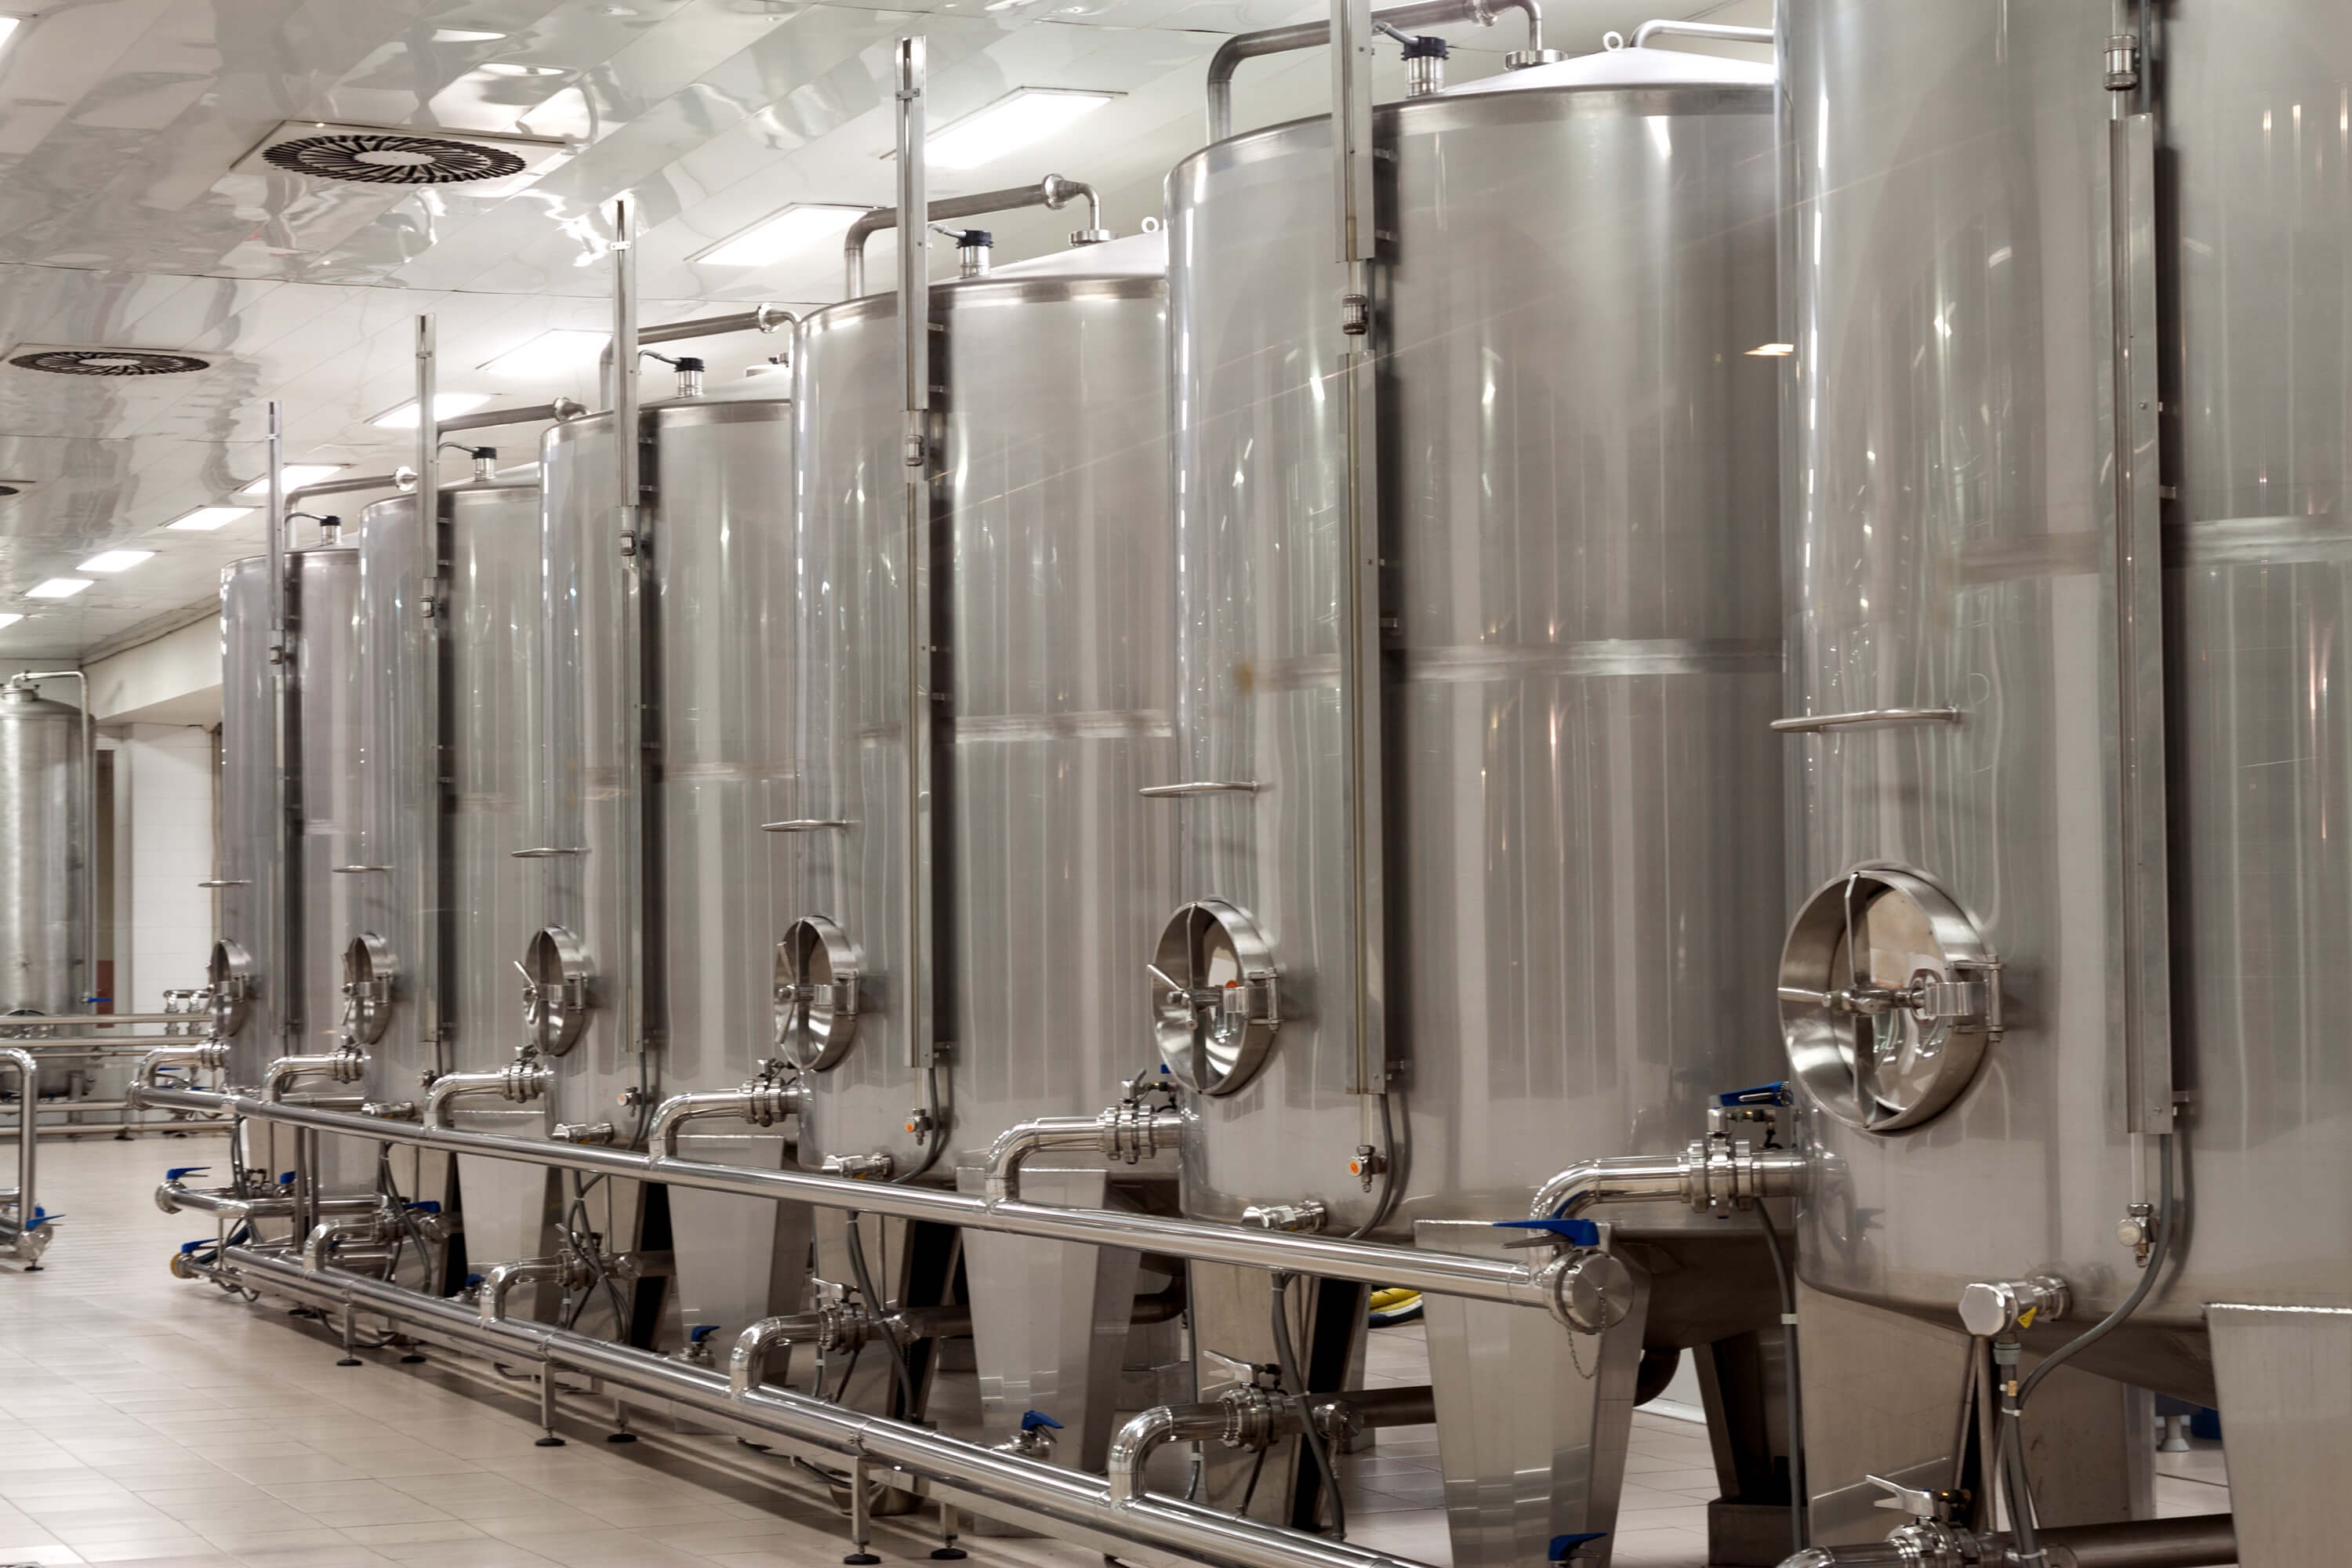 Giant fermentation tanks of engineered microorganisms can sustainably “brew” chemical products